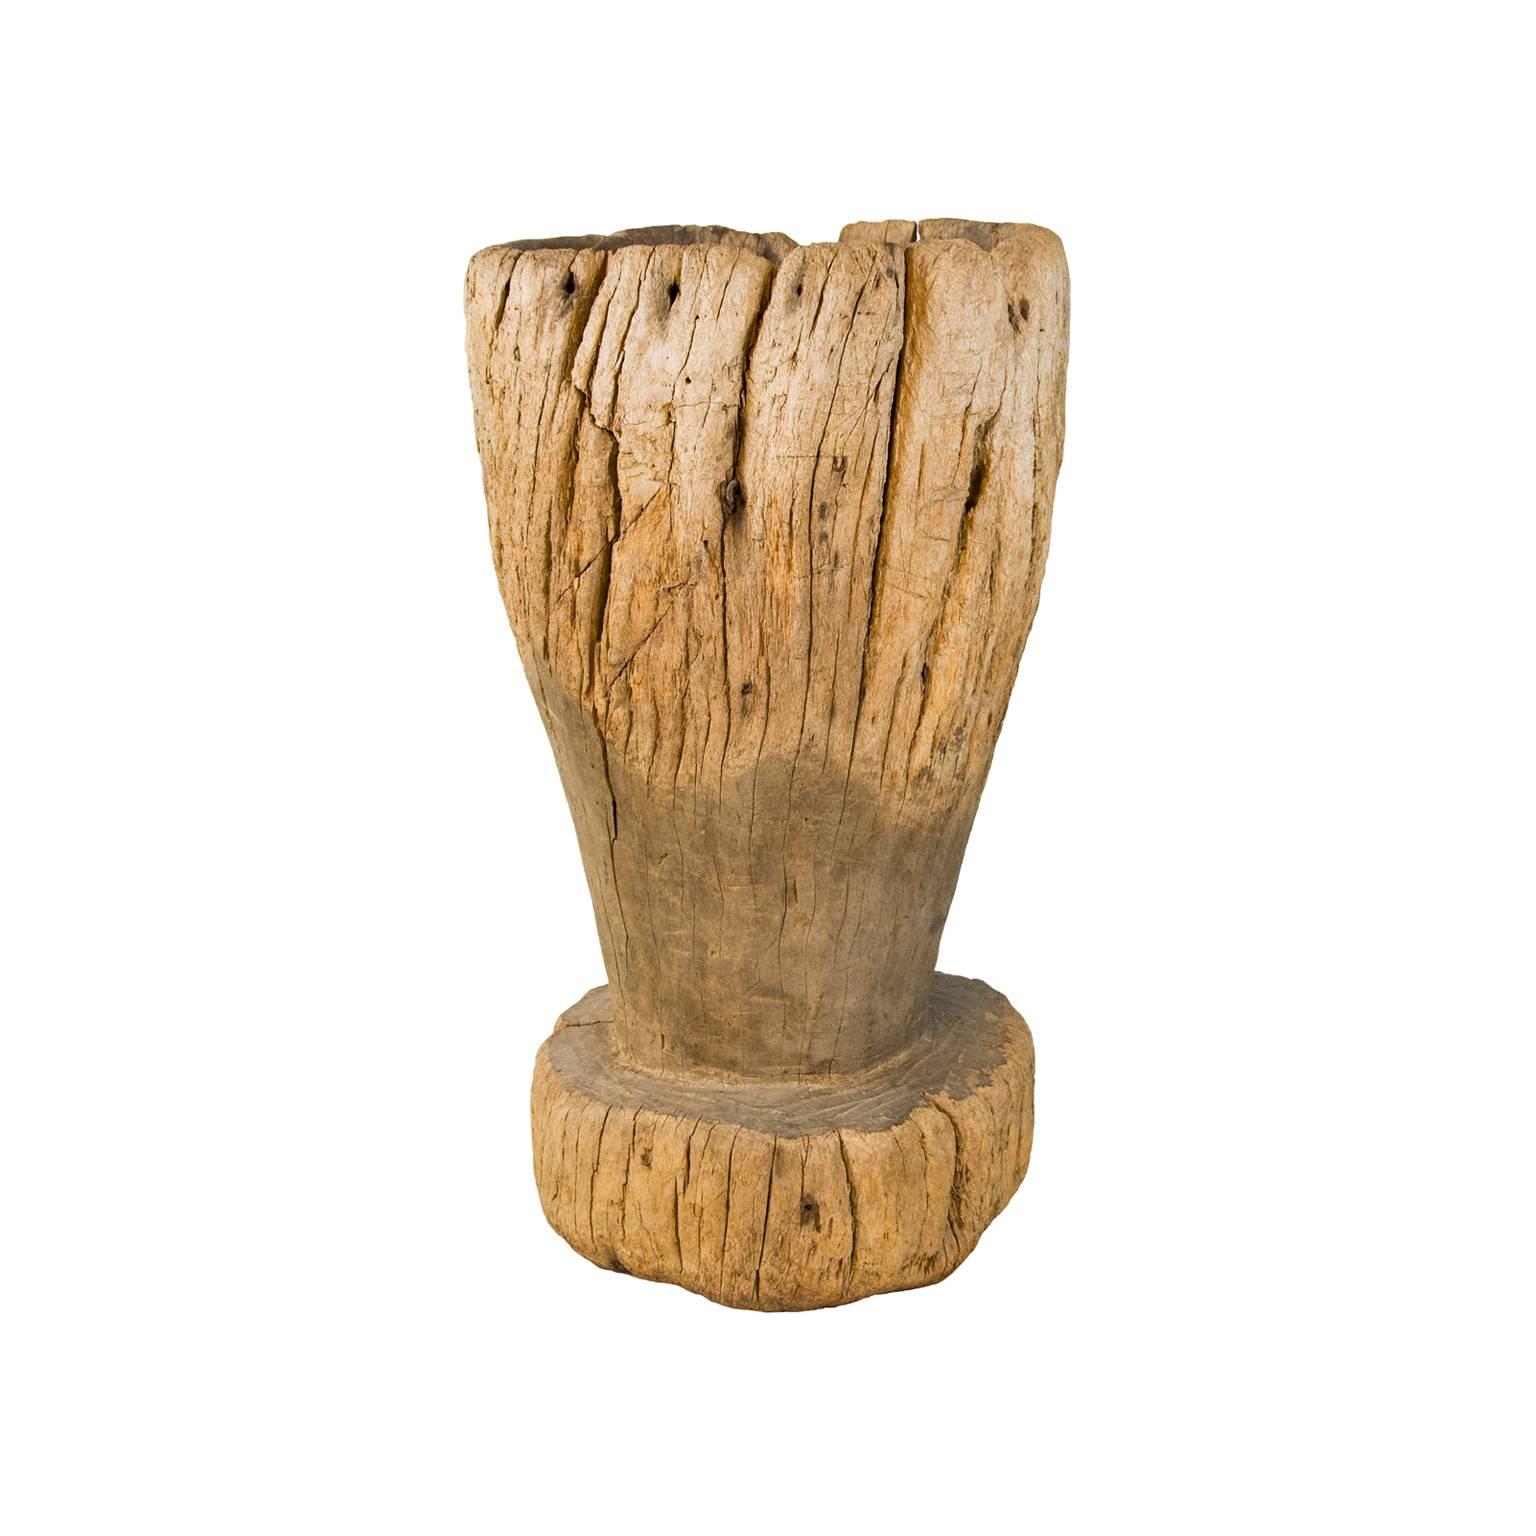 Large mortar and pestle from late 19th to early 20th century, carved from single piece of wood. This item was used to mill grain and wheat. 

Measures: Mortar height 33in, diameter 19.5in
Mortar bowl depth 12in
Pestle height 31in.